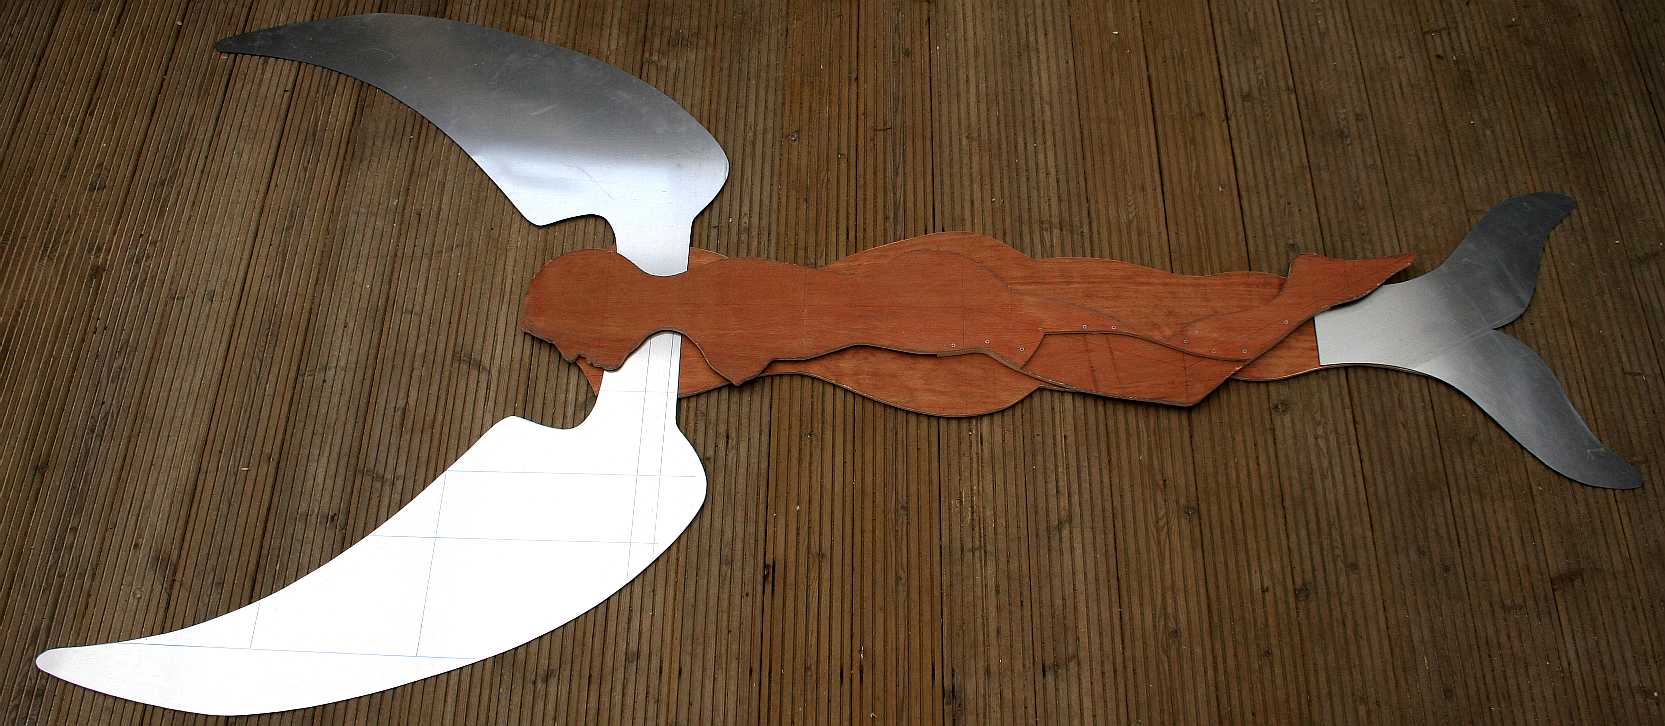 The aluminium wings and tail are cut from sheet metal to complete the set. Now begins the job of joining them all together. Plywood is made by bonding thin layers of wood together with the grain alternating in direction with each layer. By this means a flat board can be made that is very strong. Copyright © photograph.